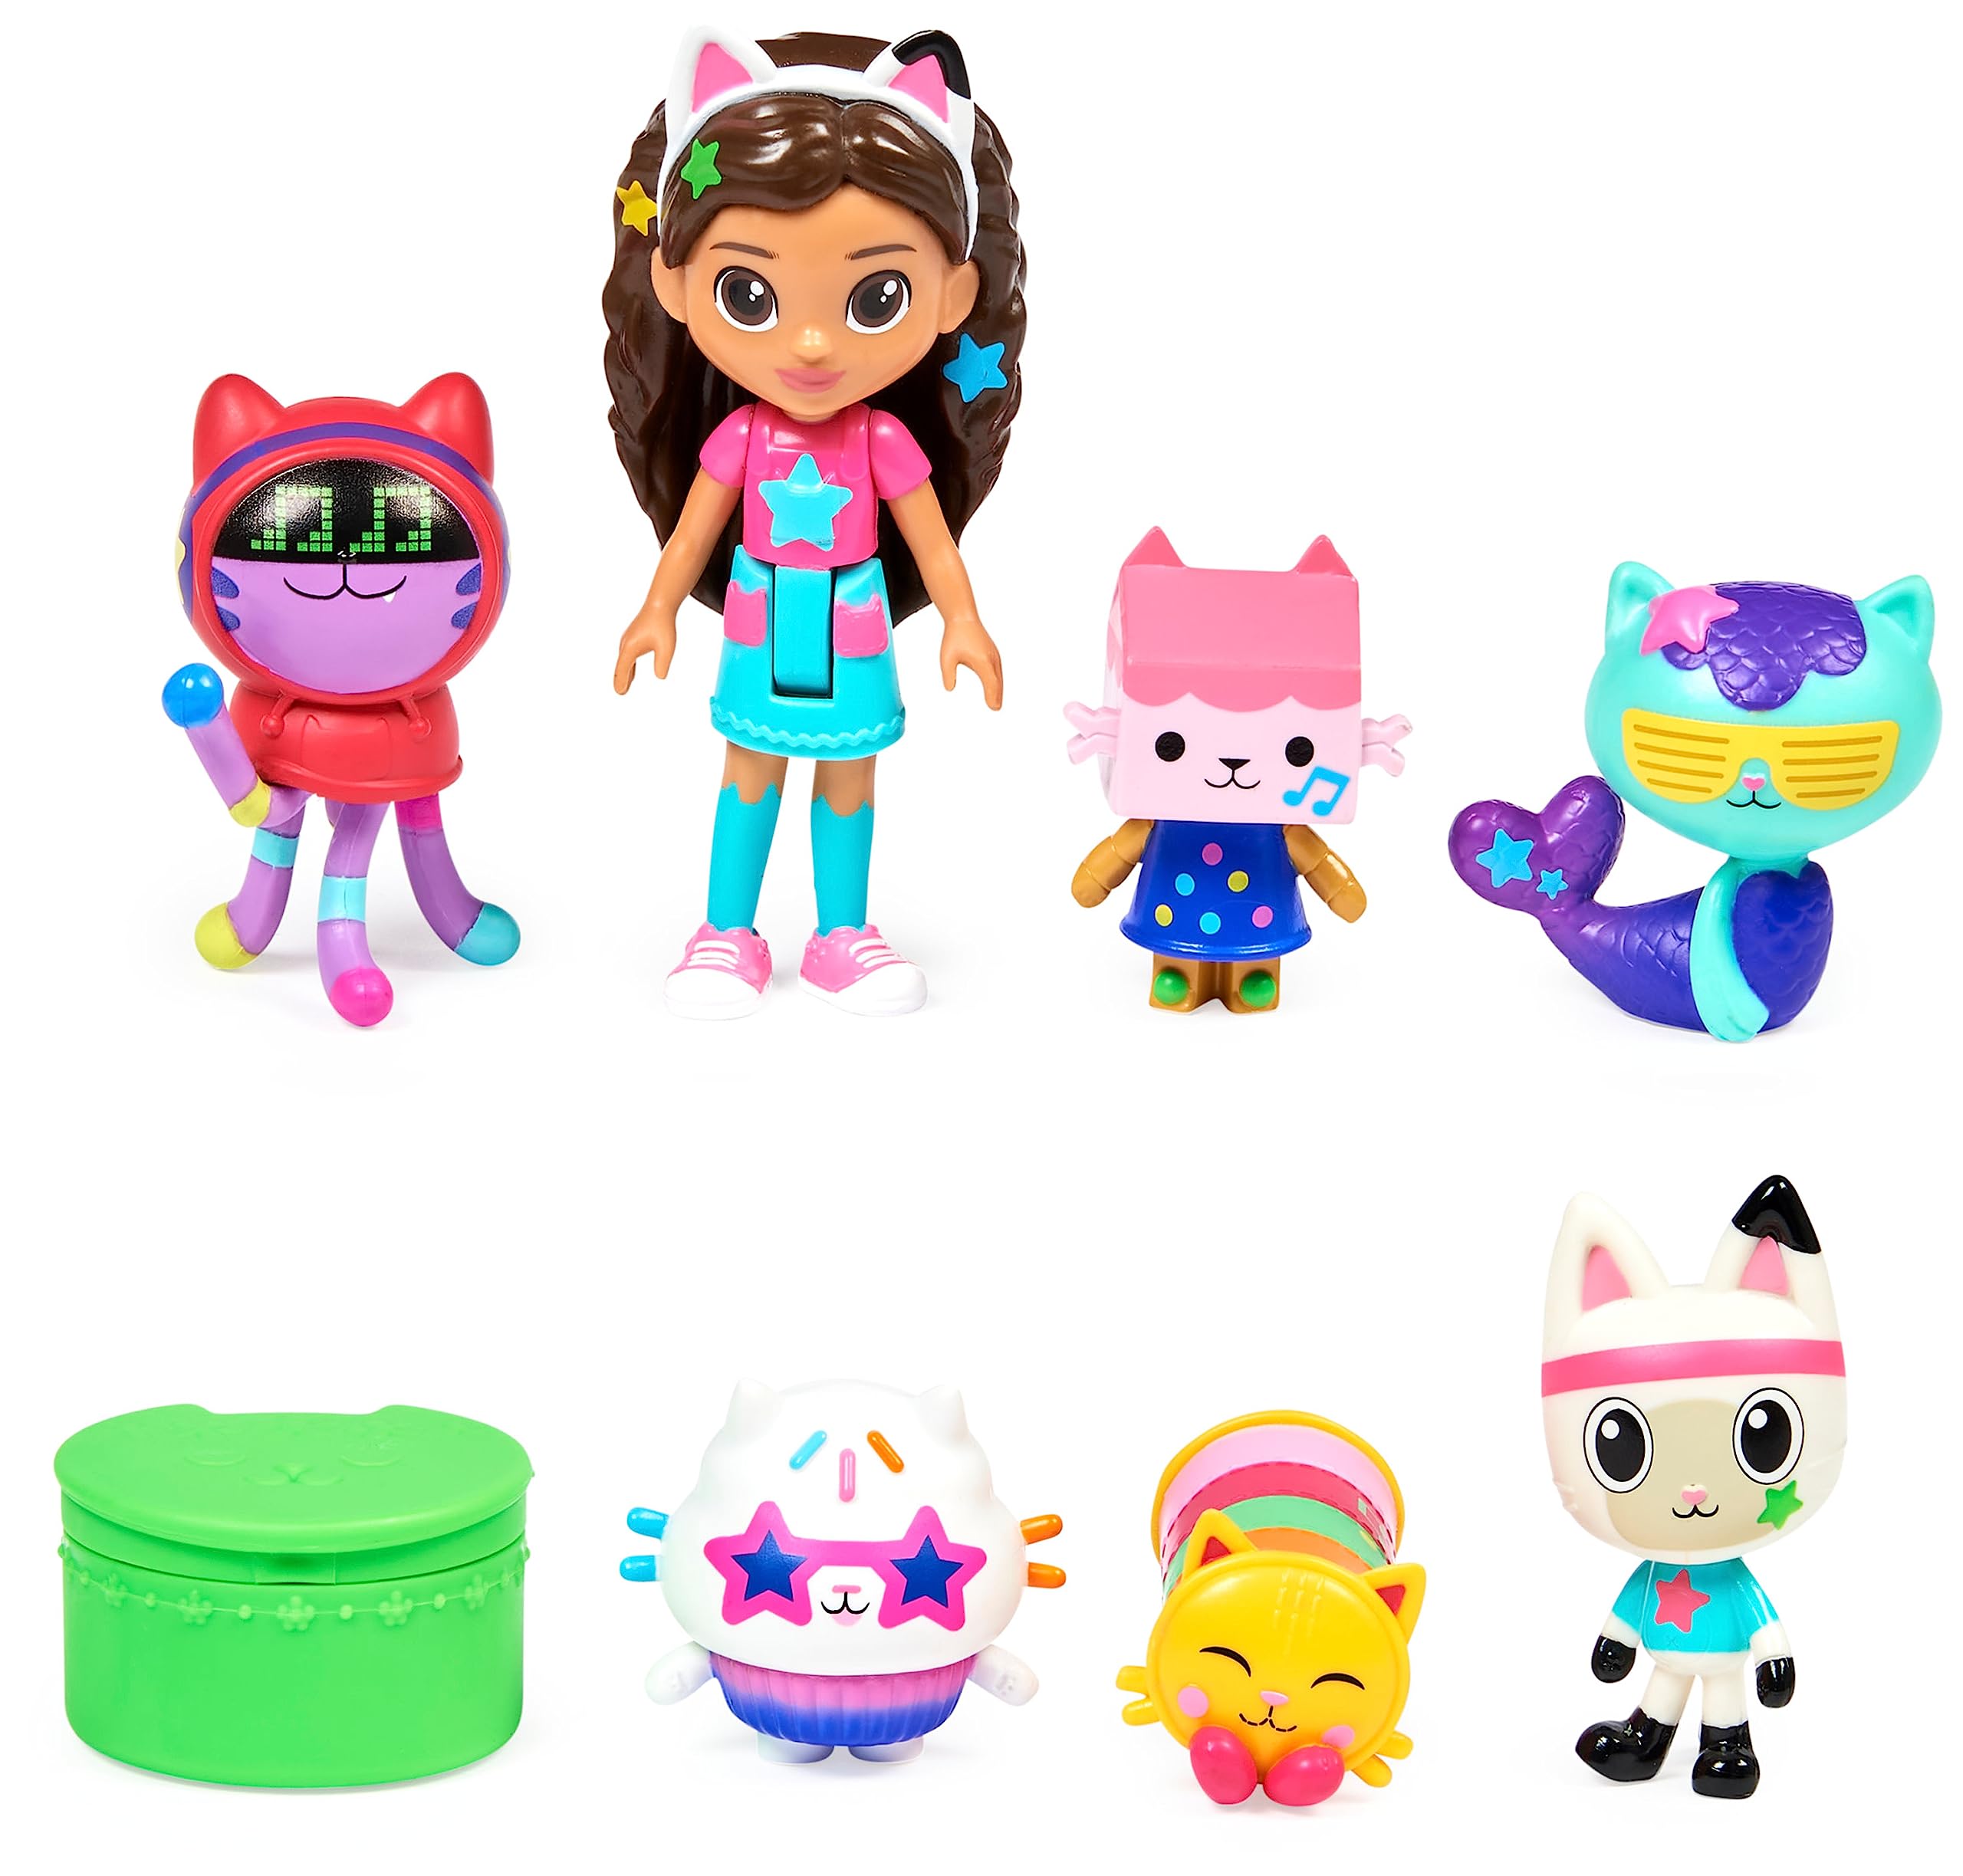 9-Piece Gabby's Dollhouse Dance Party Theme Figure Set $6.80 + Free Shipping w/ Prime or on $35+